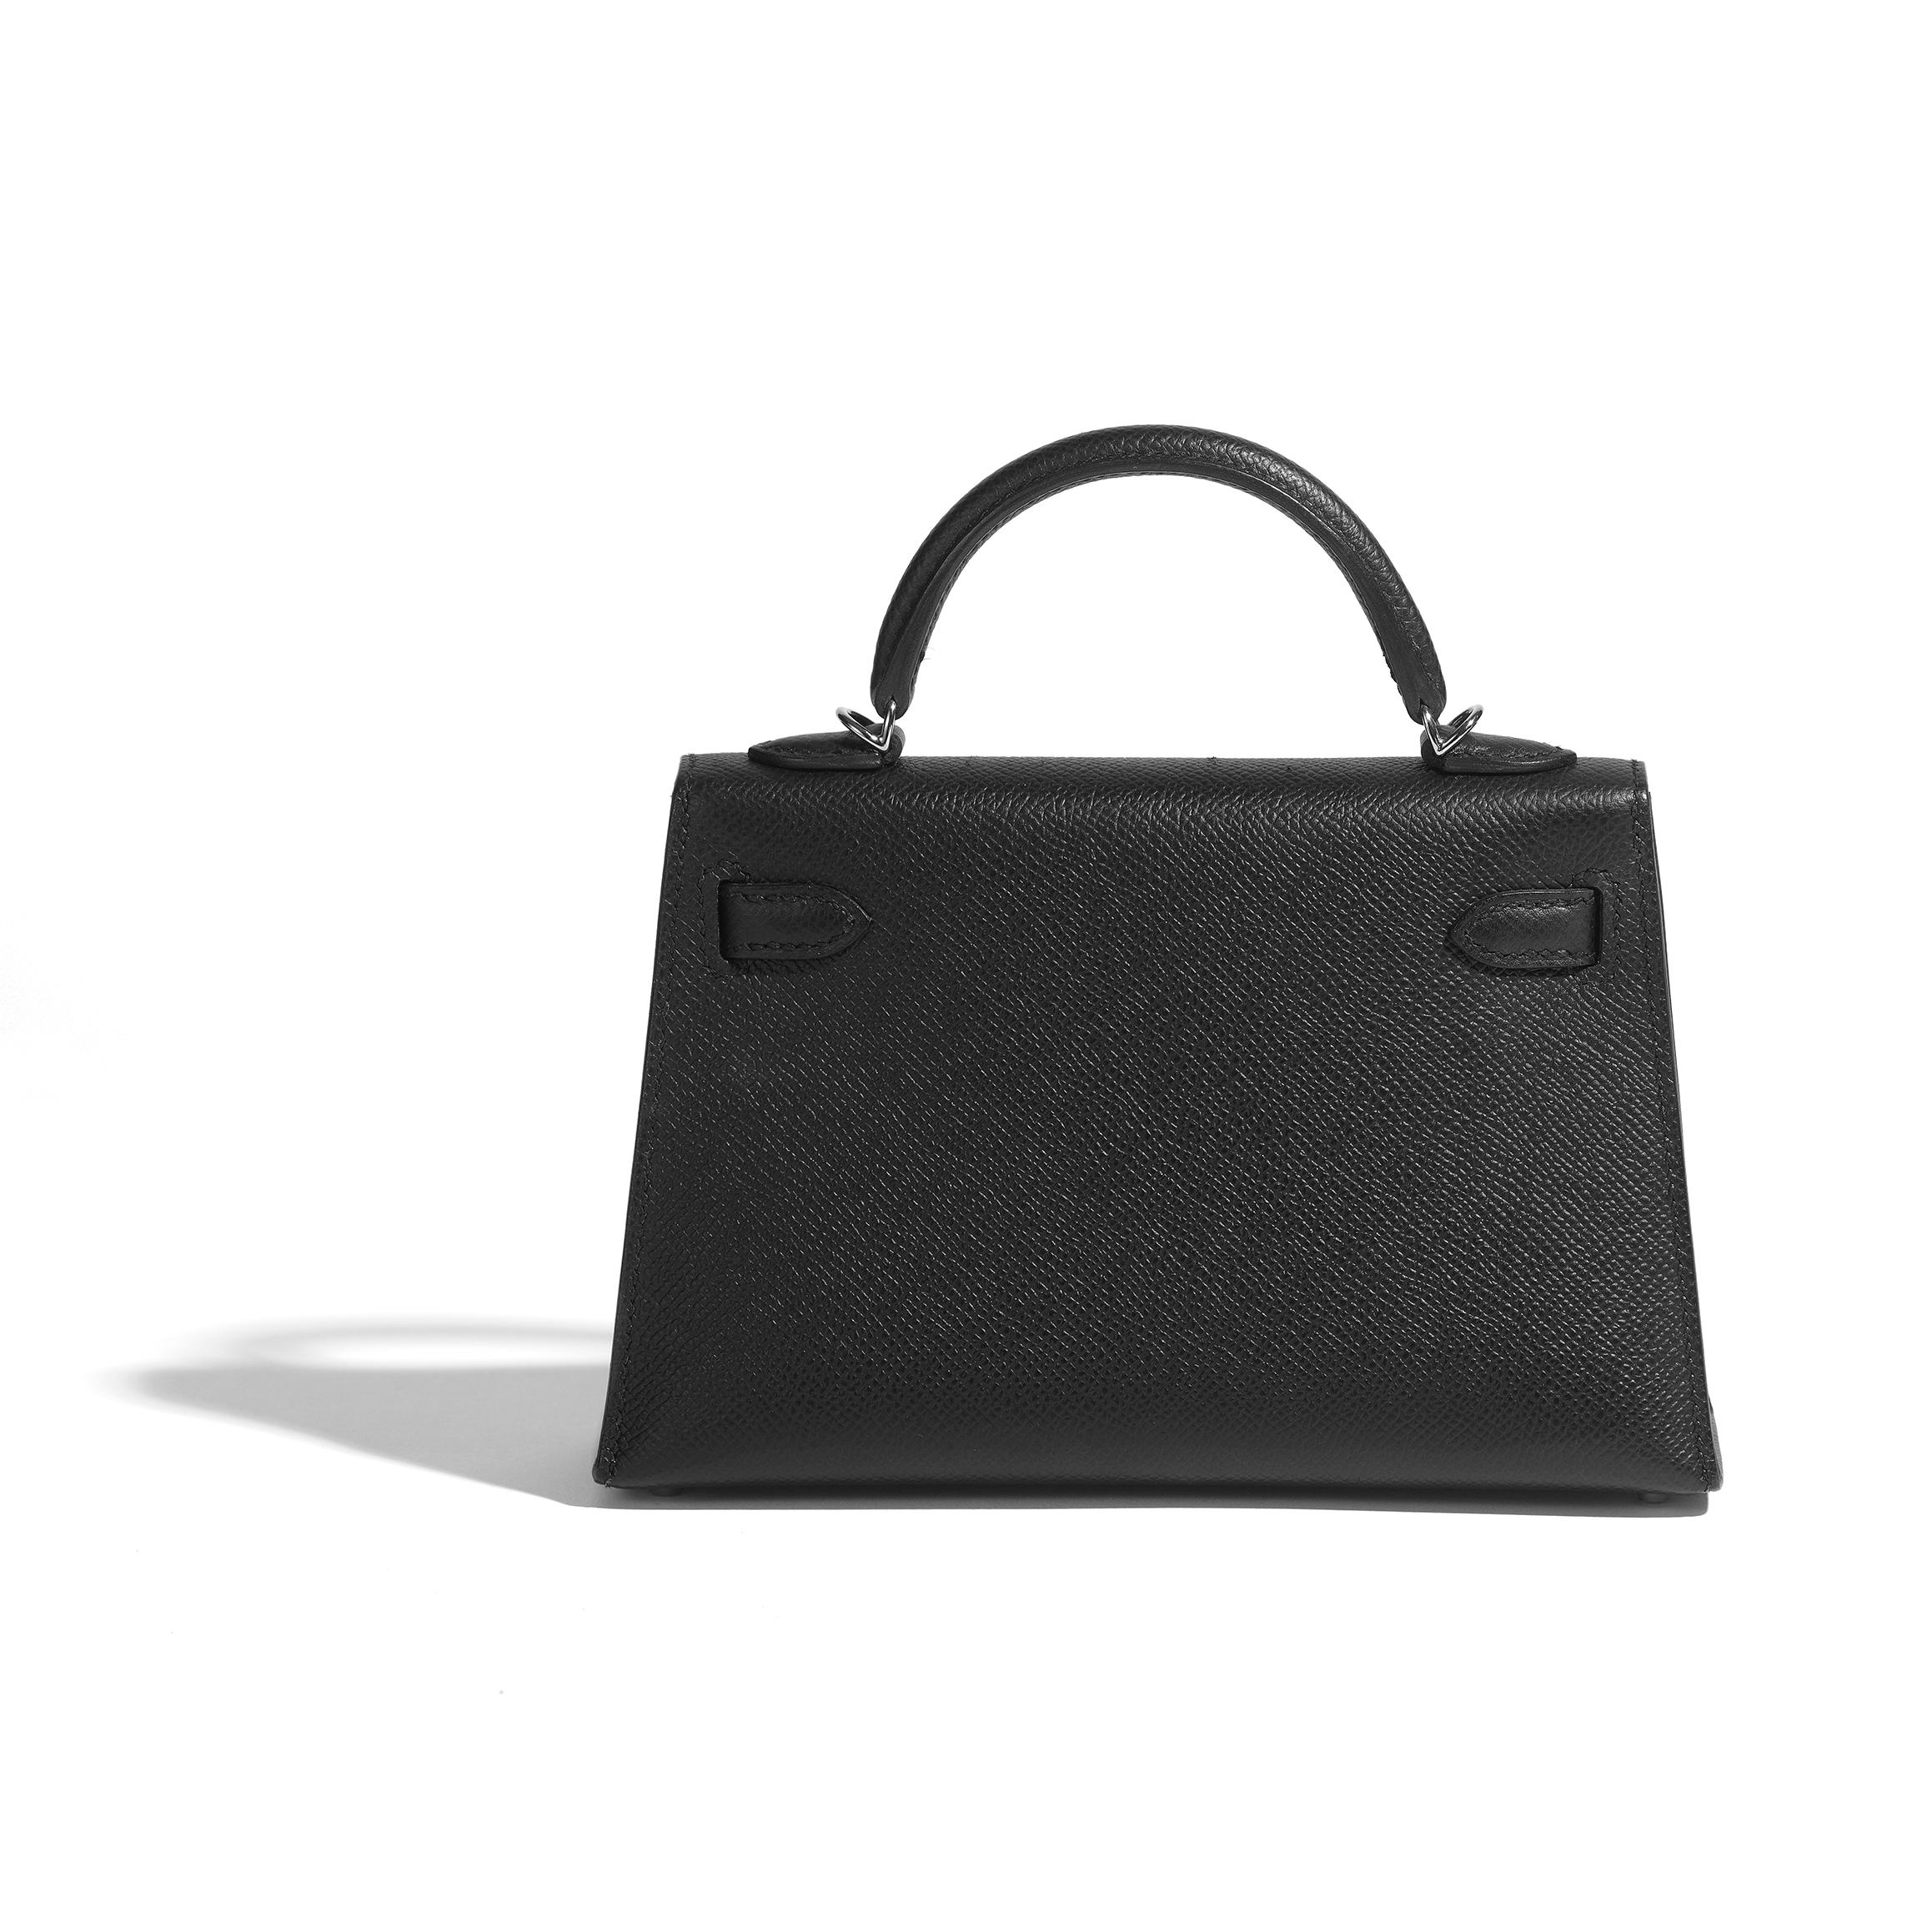 This is a beautiful example of a mini kelly 20 sellier. In the luxurious & popular epsom leather, this is a stamped-grain leather that is lightweight, durable and easily cared for. This gorgeous mini bag also comes with the detachable shoulder